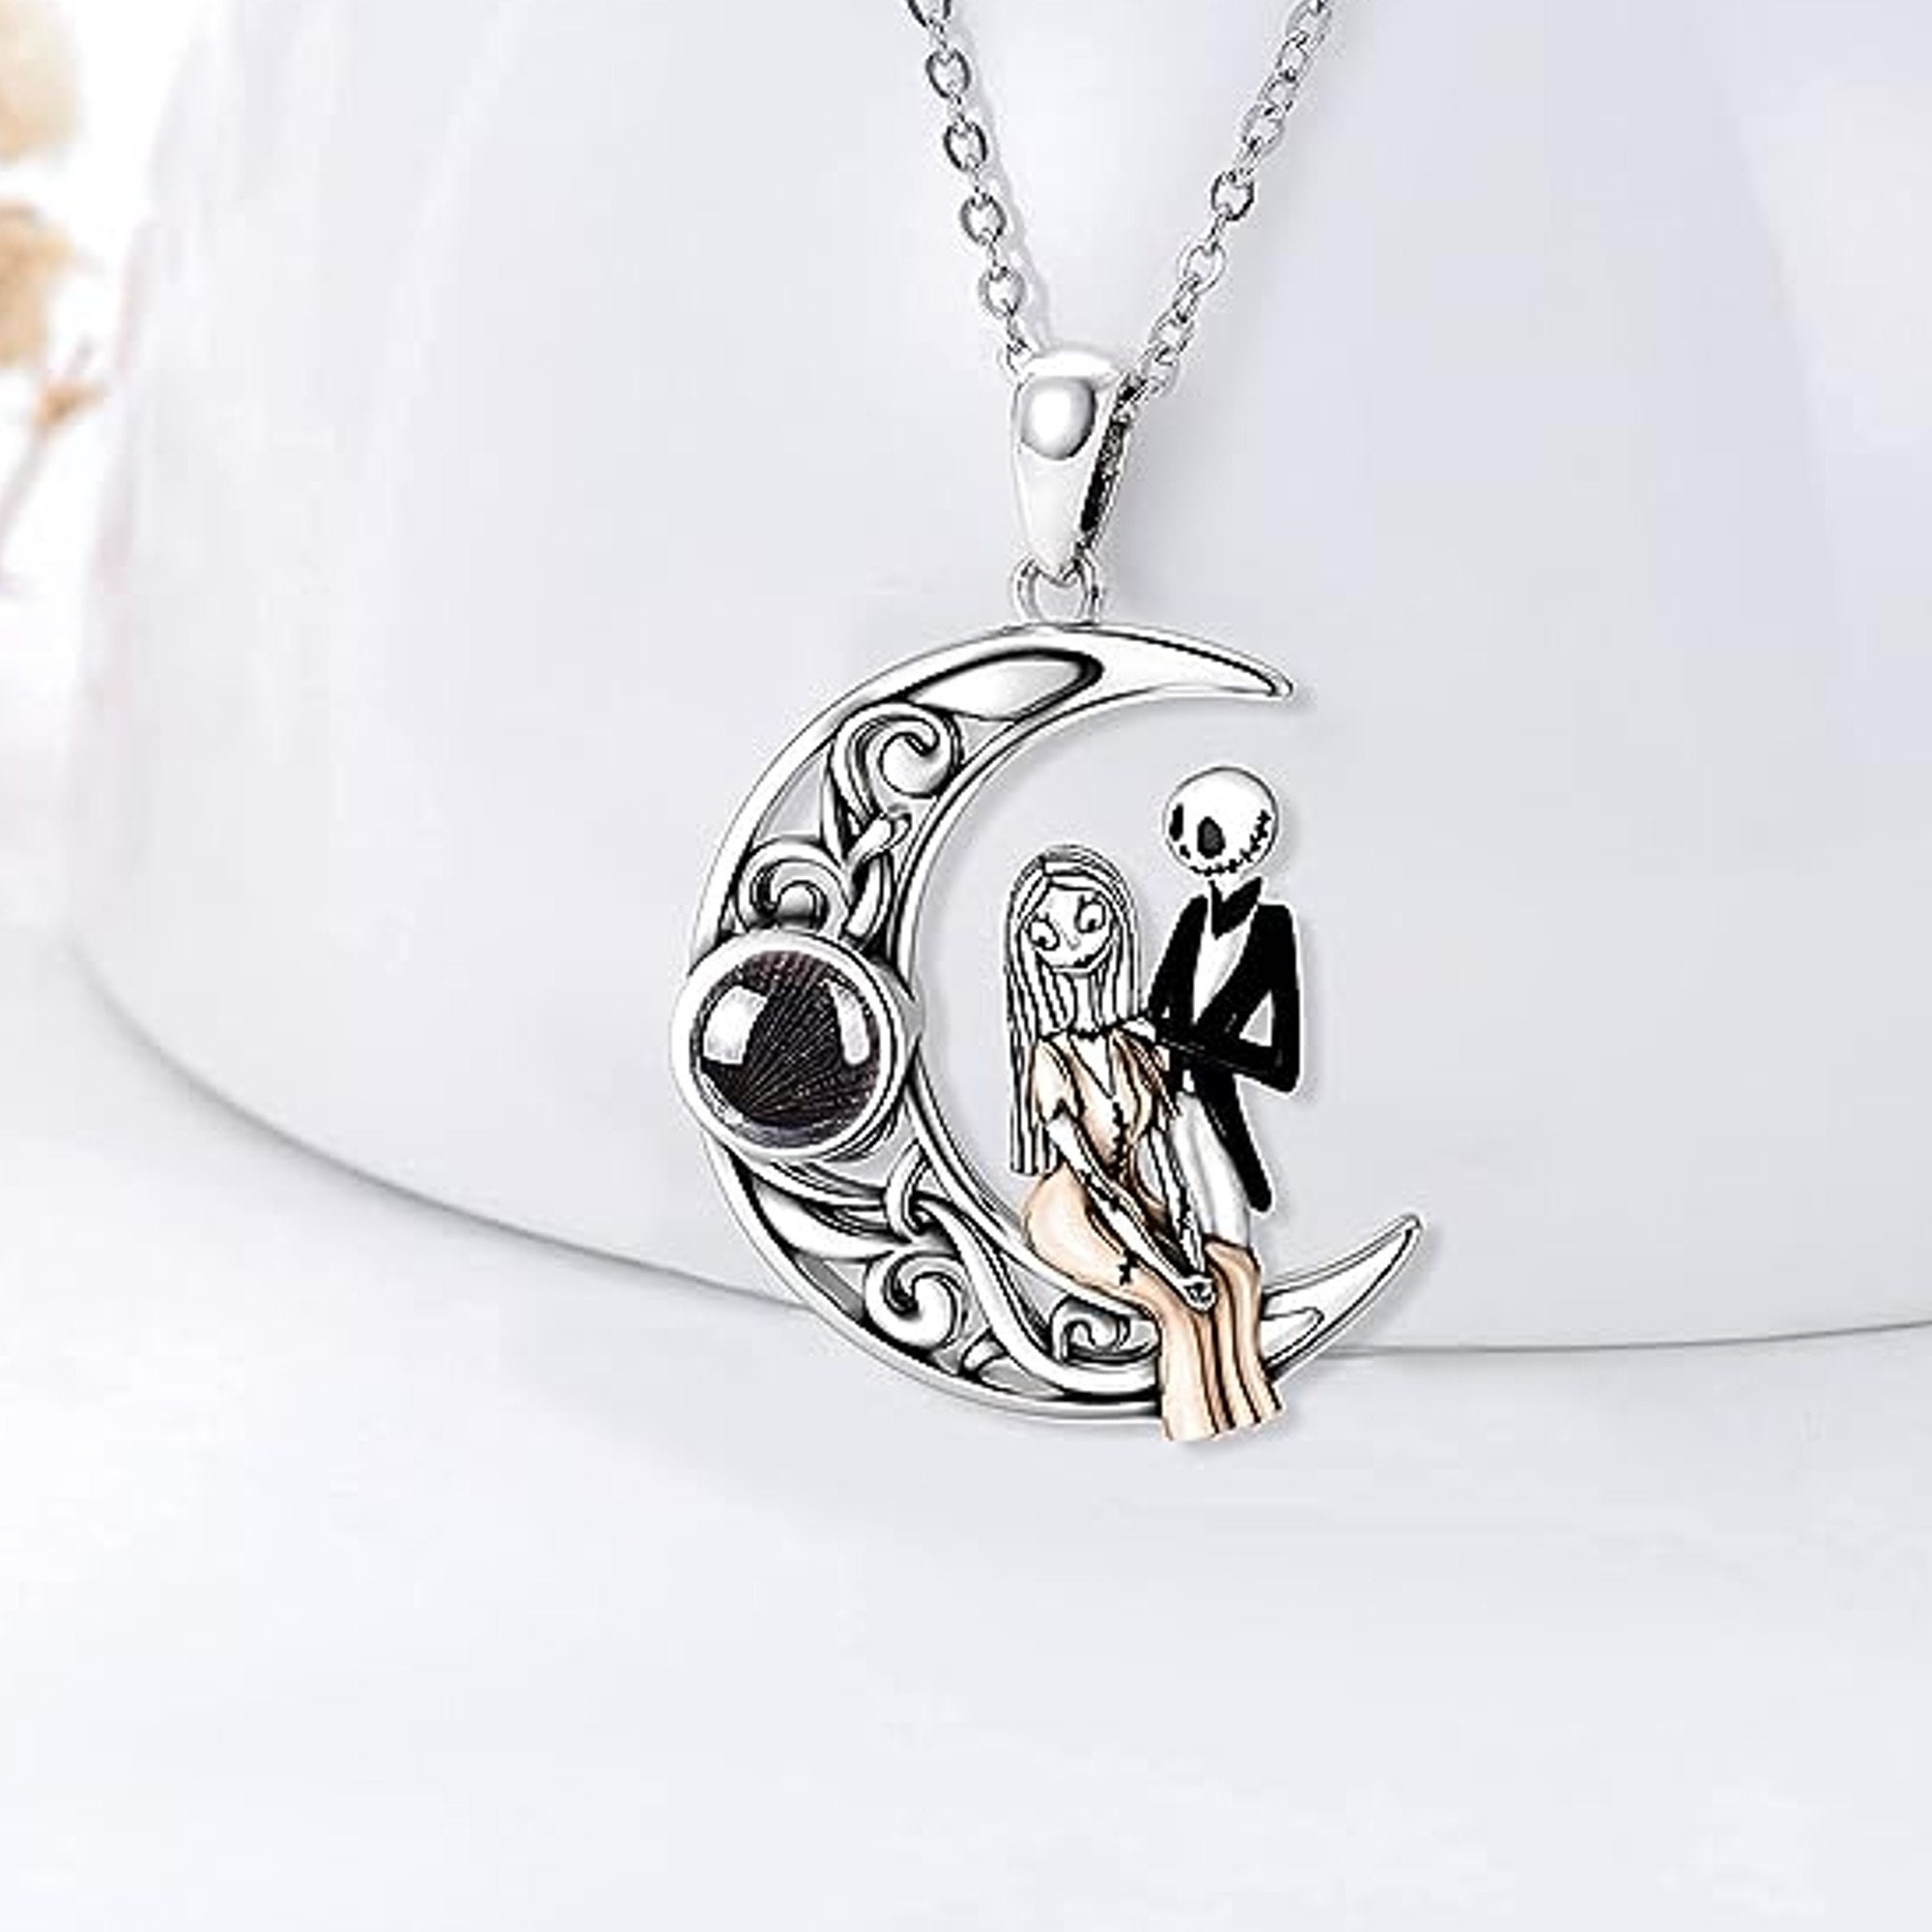 Jack Skellington and Sally Lock Necklace – The Nightmare Before Christmas